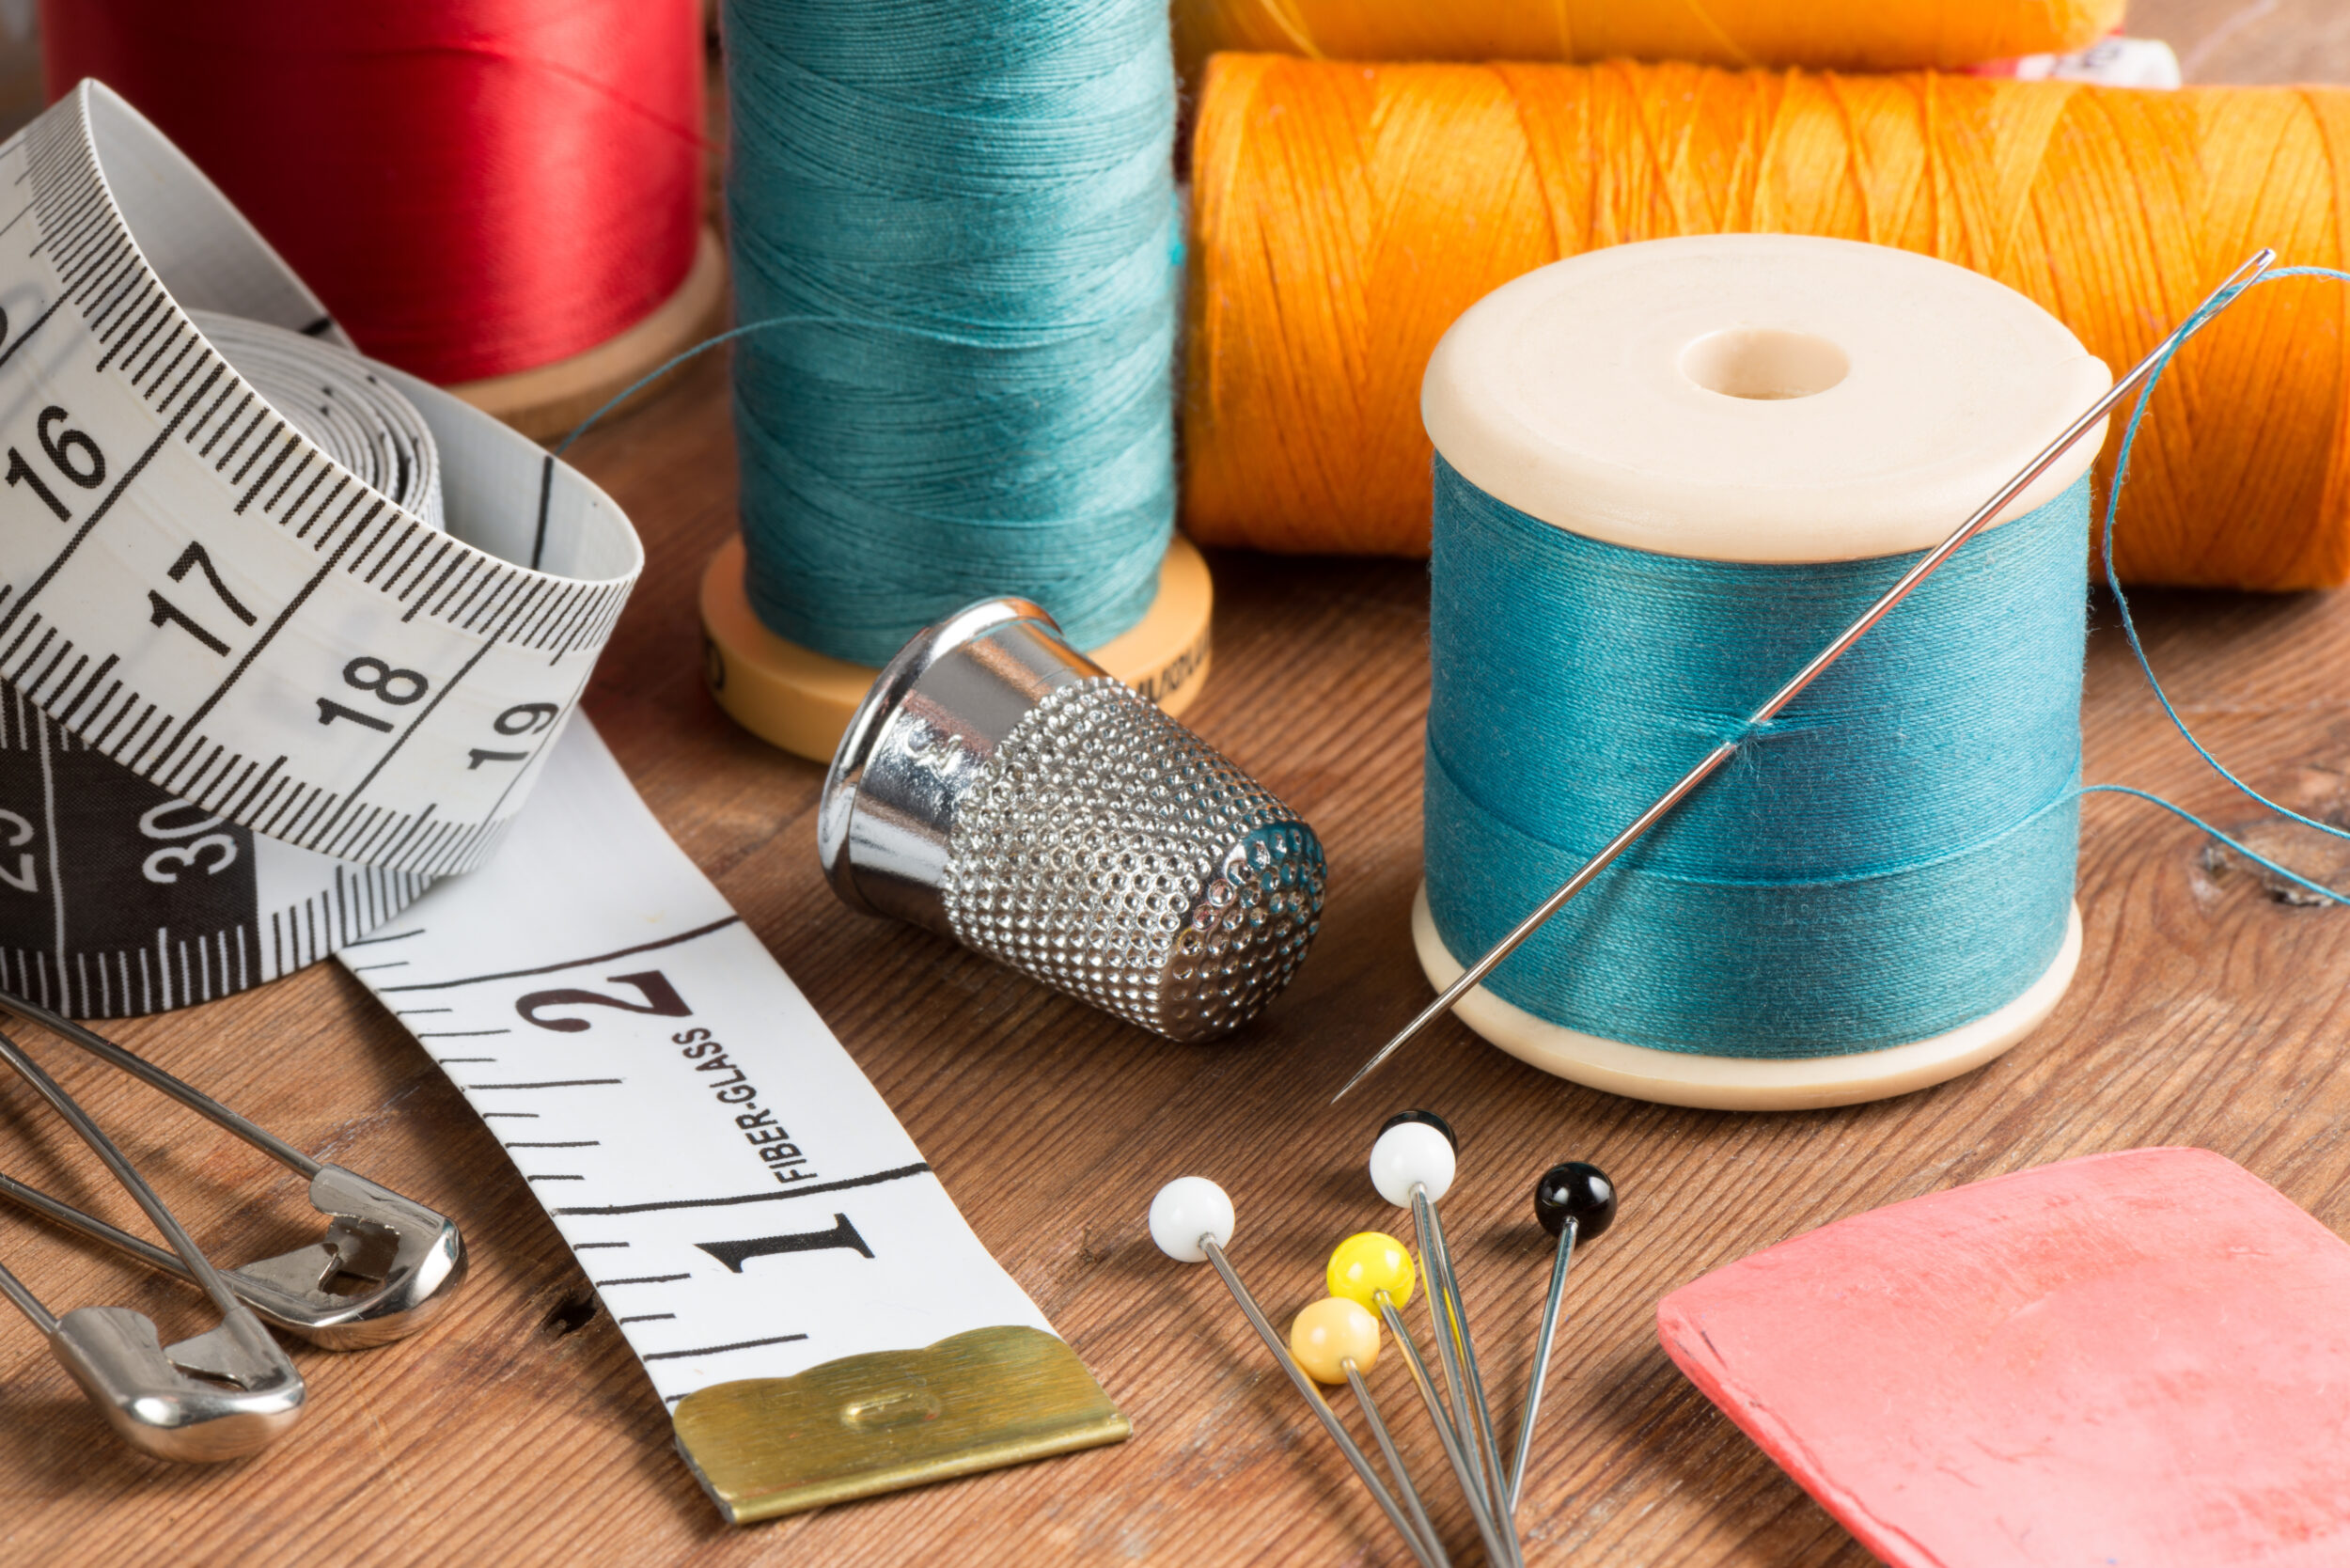 Spools of thread and basic sewing tools including pins and needles.